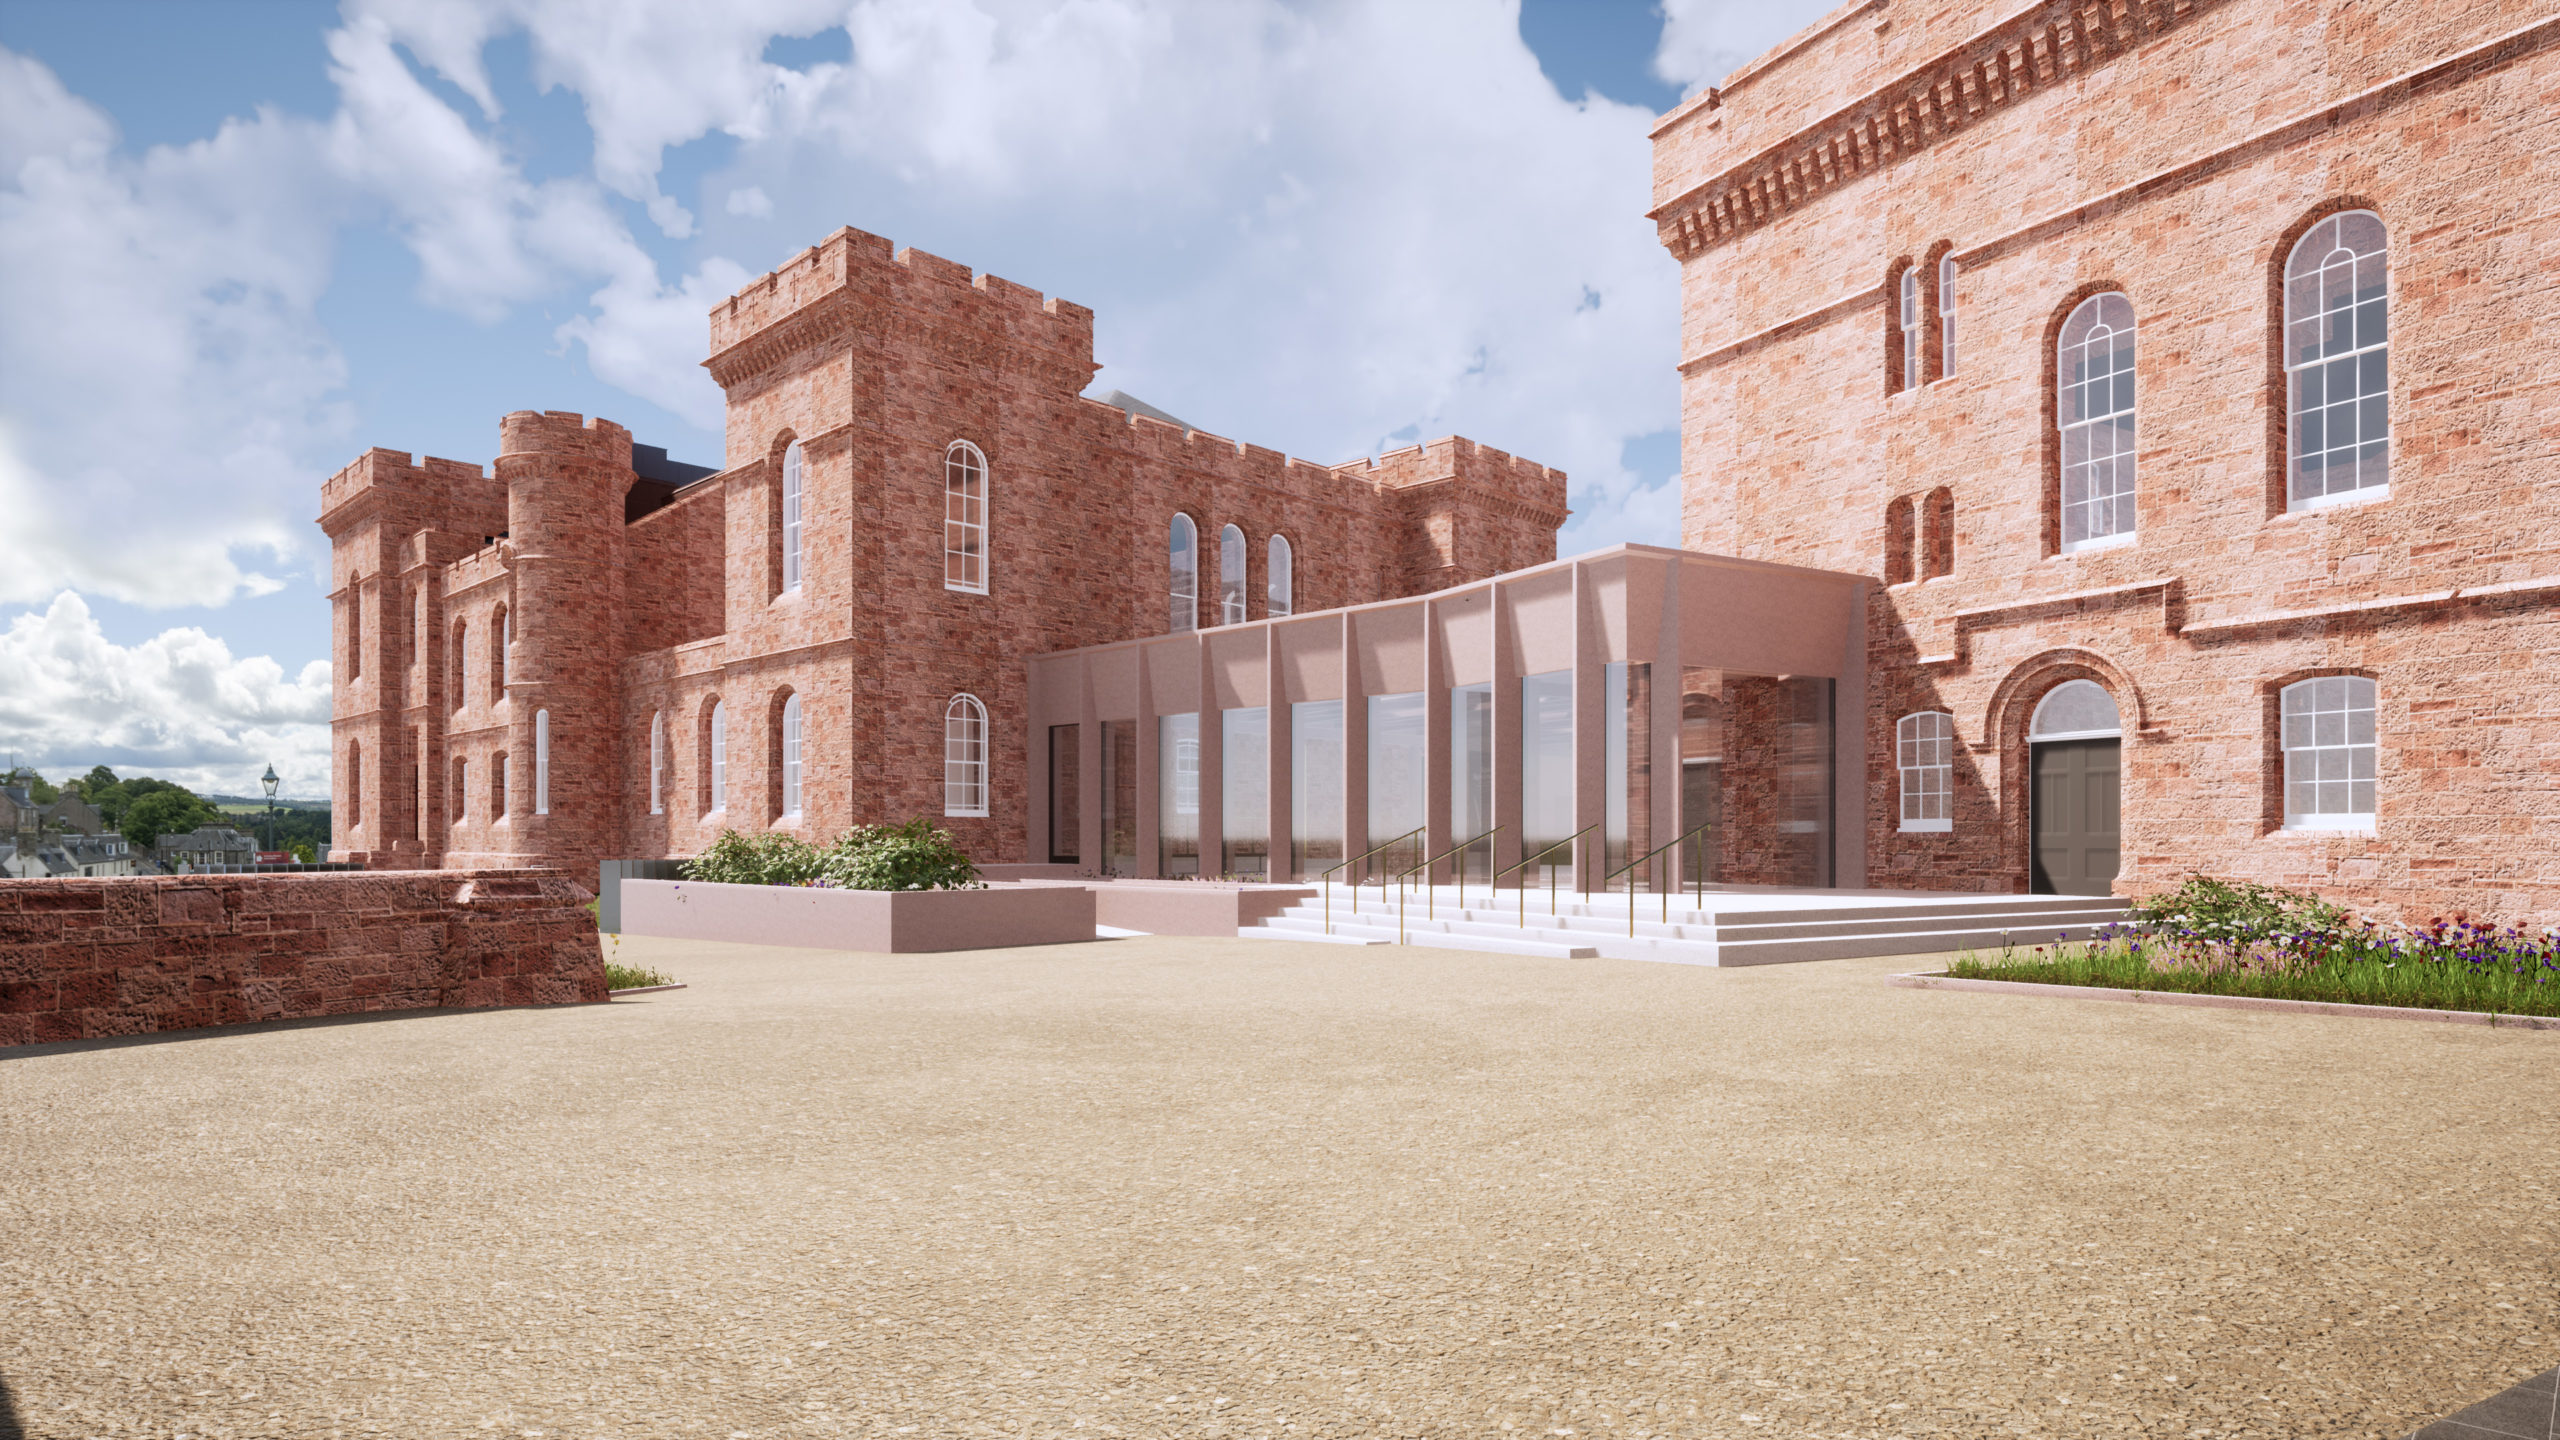 Artists impression of Inverness Castle: Exterior of building.